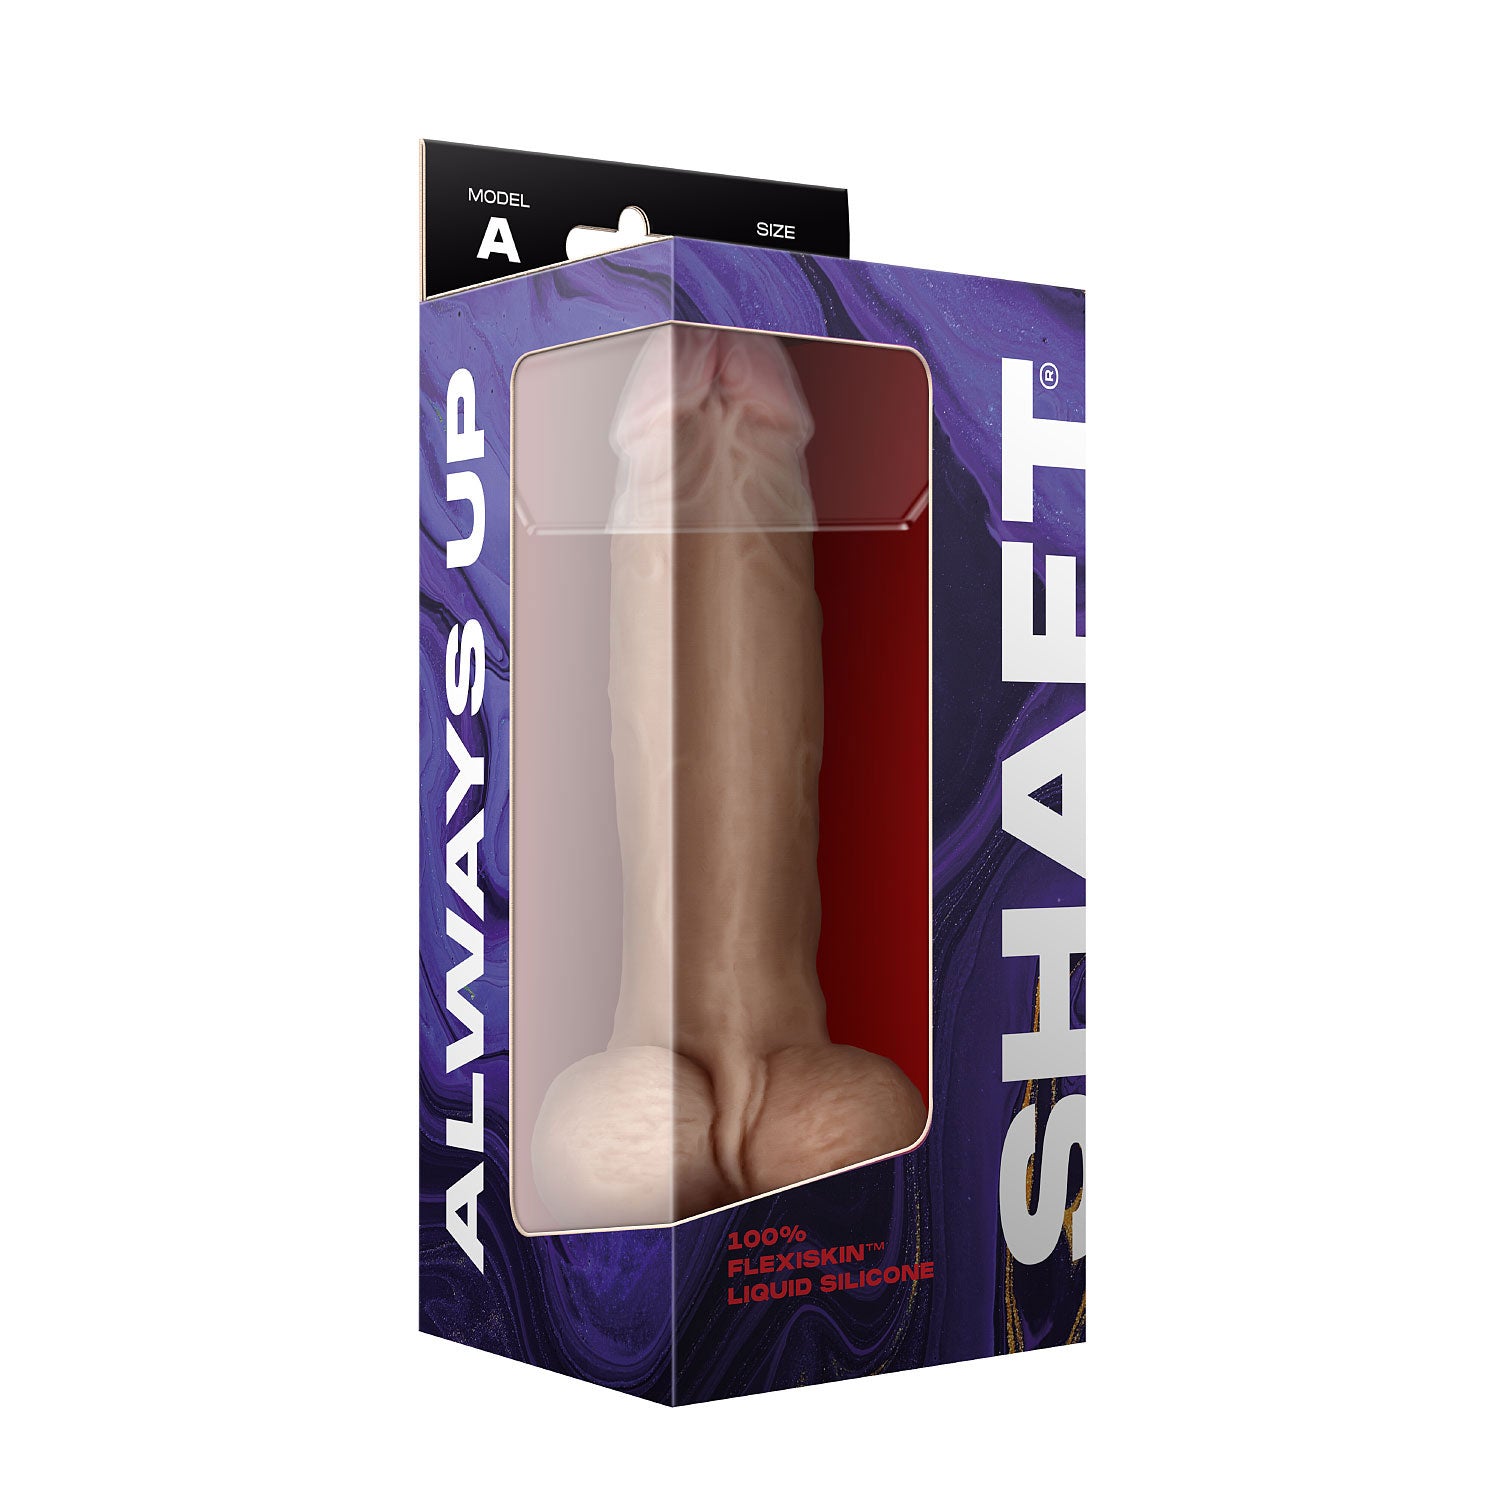 Shaft - Model a 9.5 Inch Liquid Silicone Dong With Balls - Pine-1